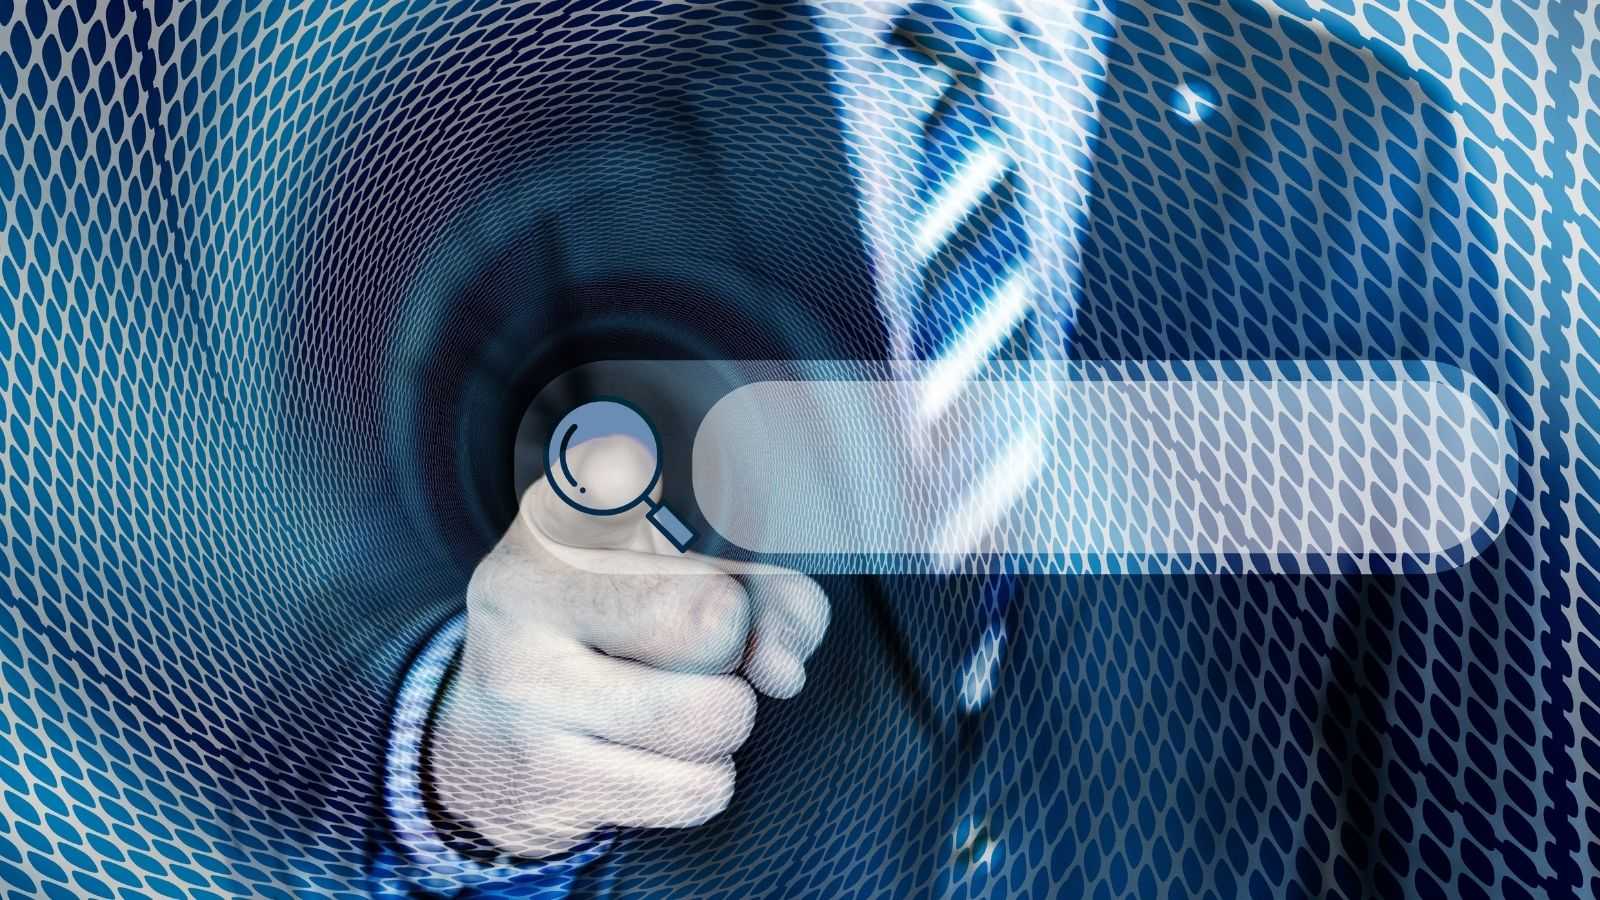 A man wearing a suit, tie and shirt, his finger touches the magnifying glass icon